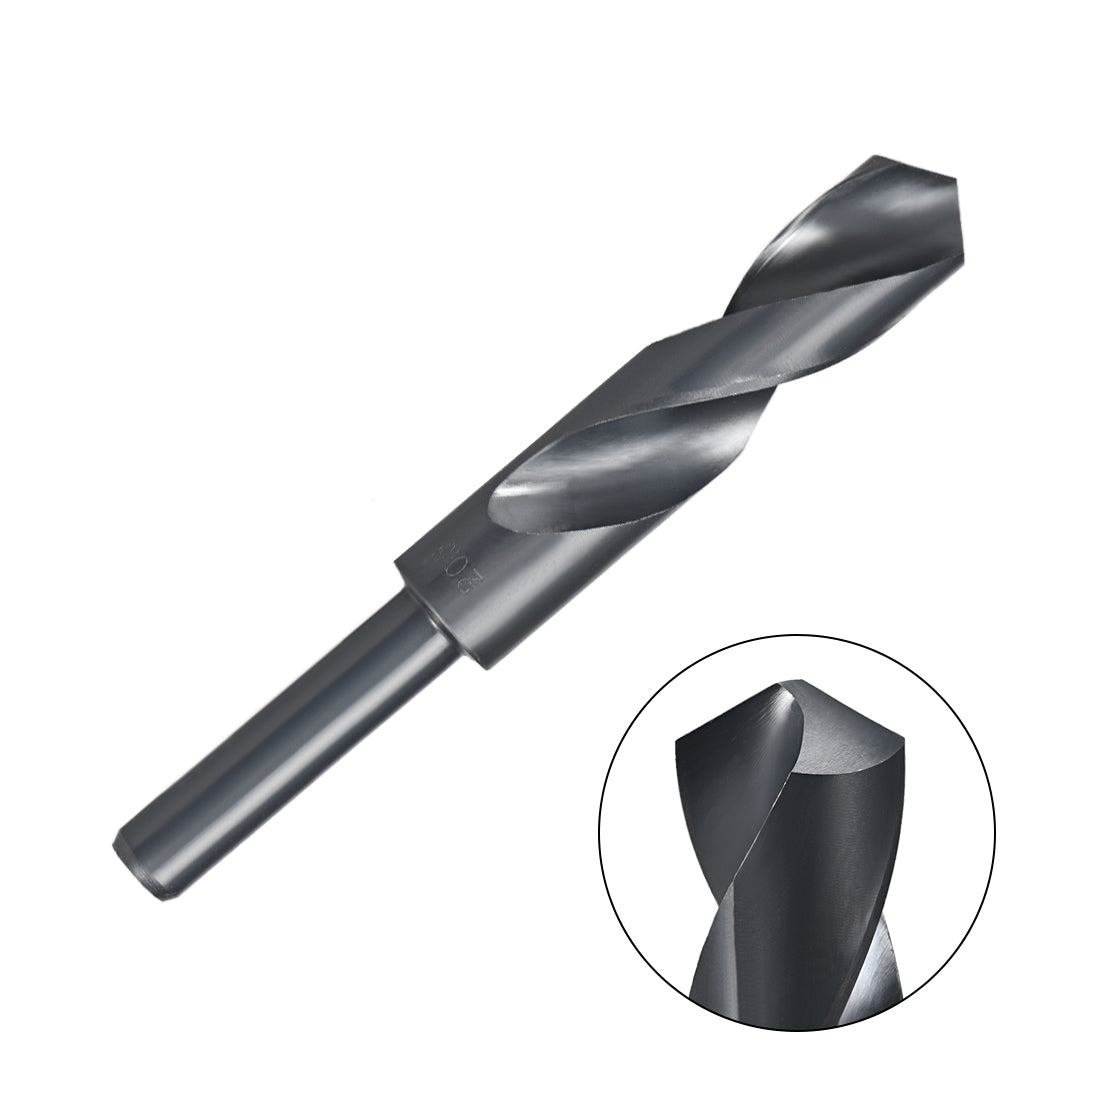 uxcell Uxcell Reduced Shank Drill Bit 20.5mm HSS 6542 Black Oxide with 1/2 Inch Straight Shank